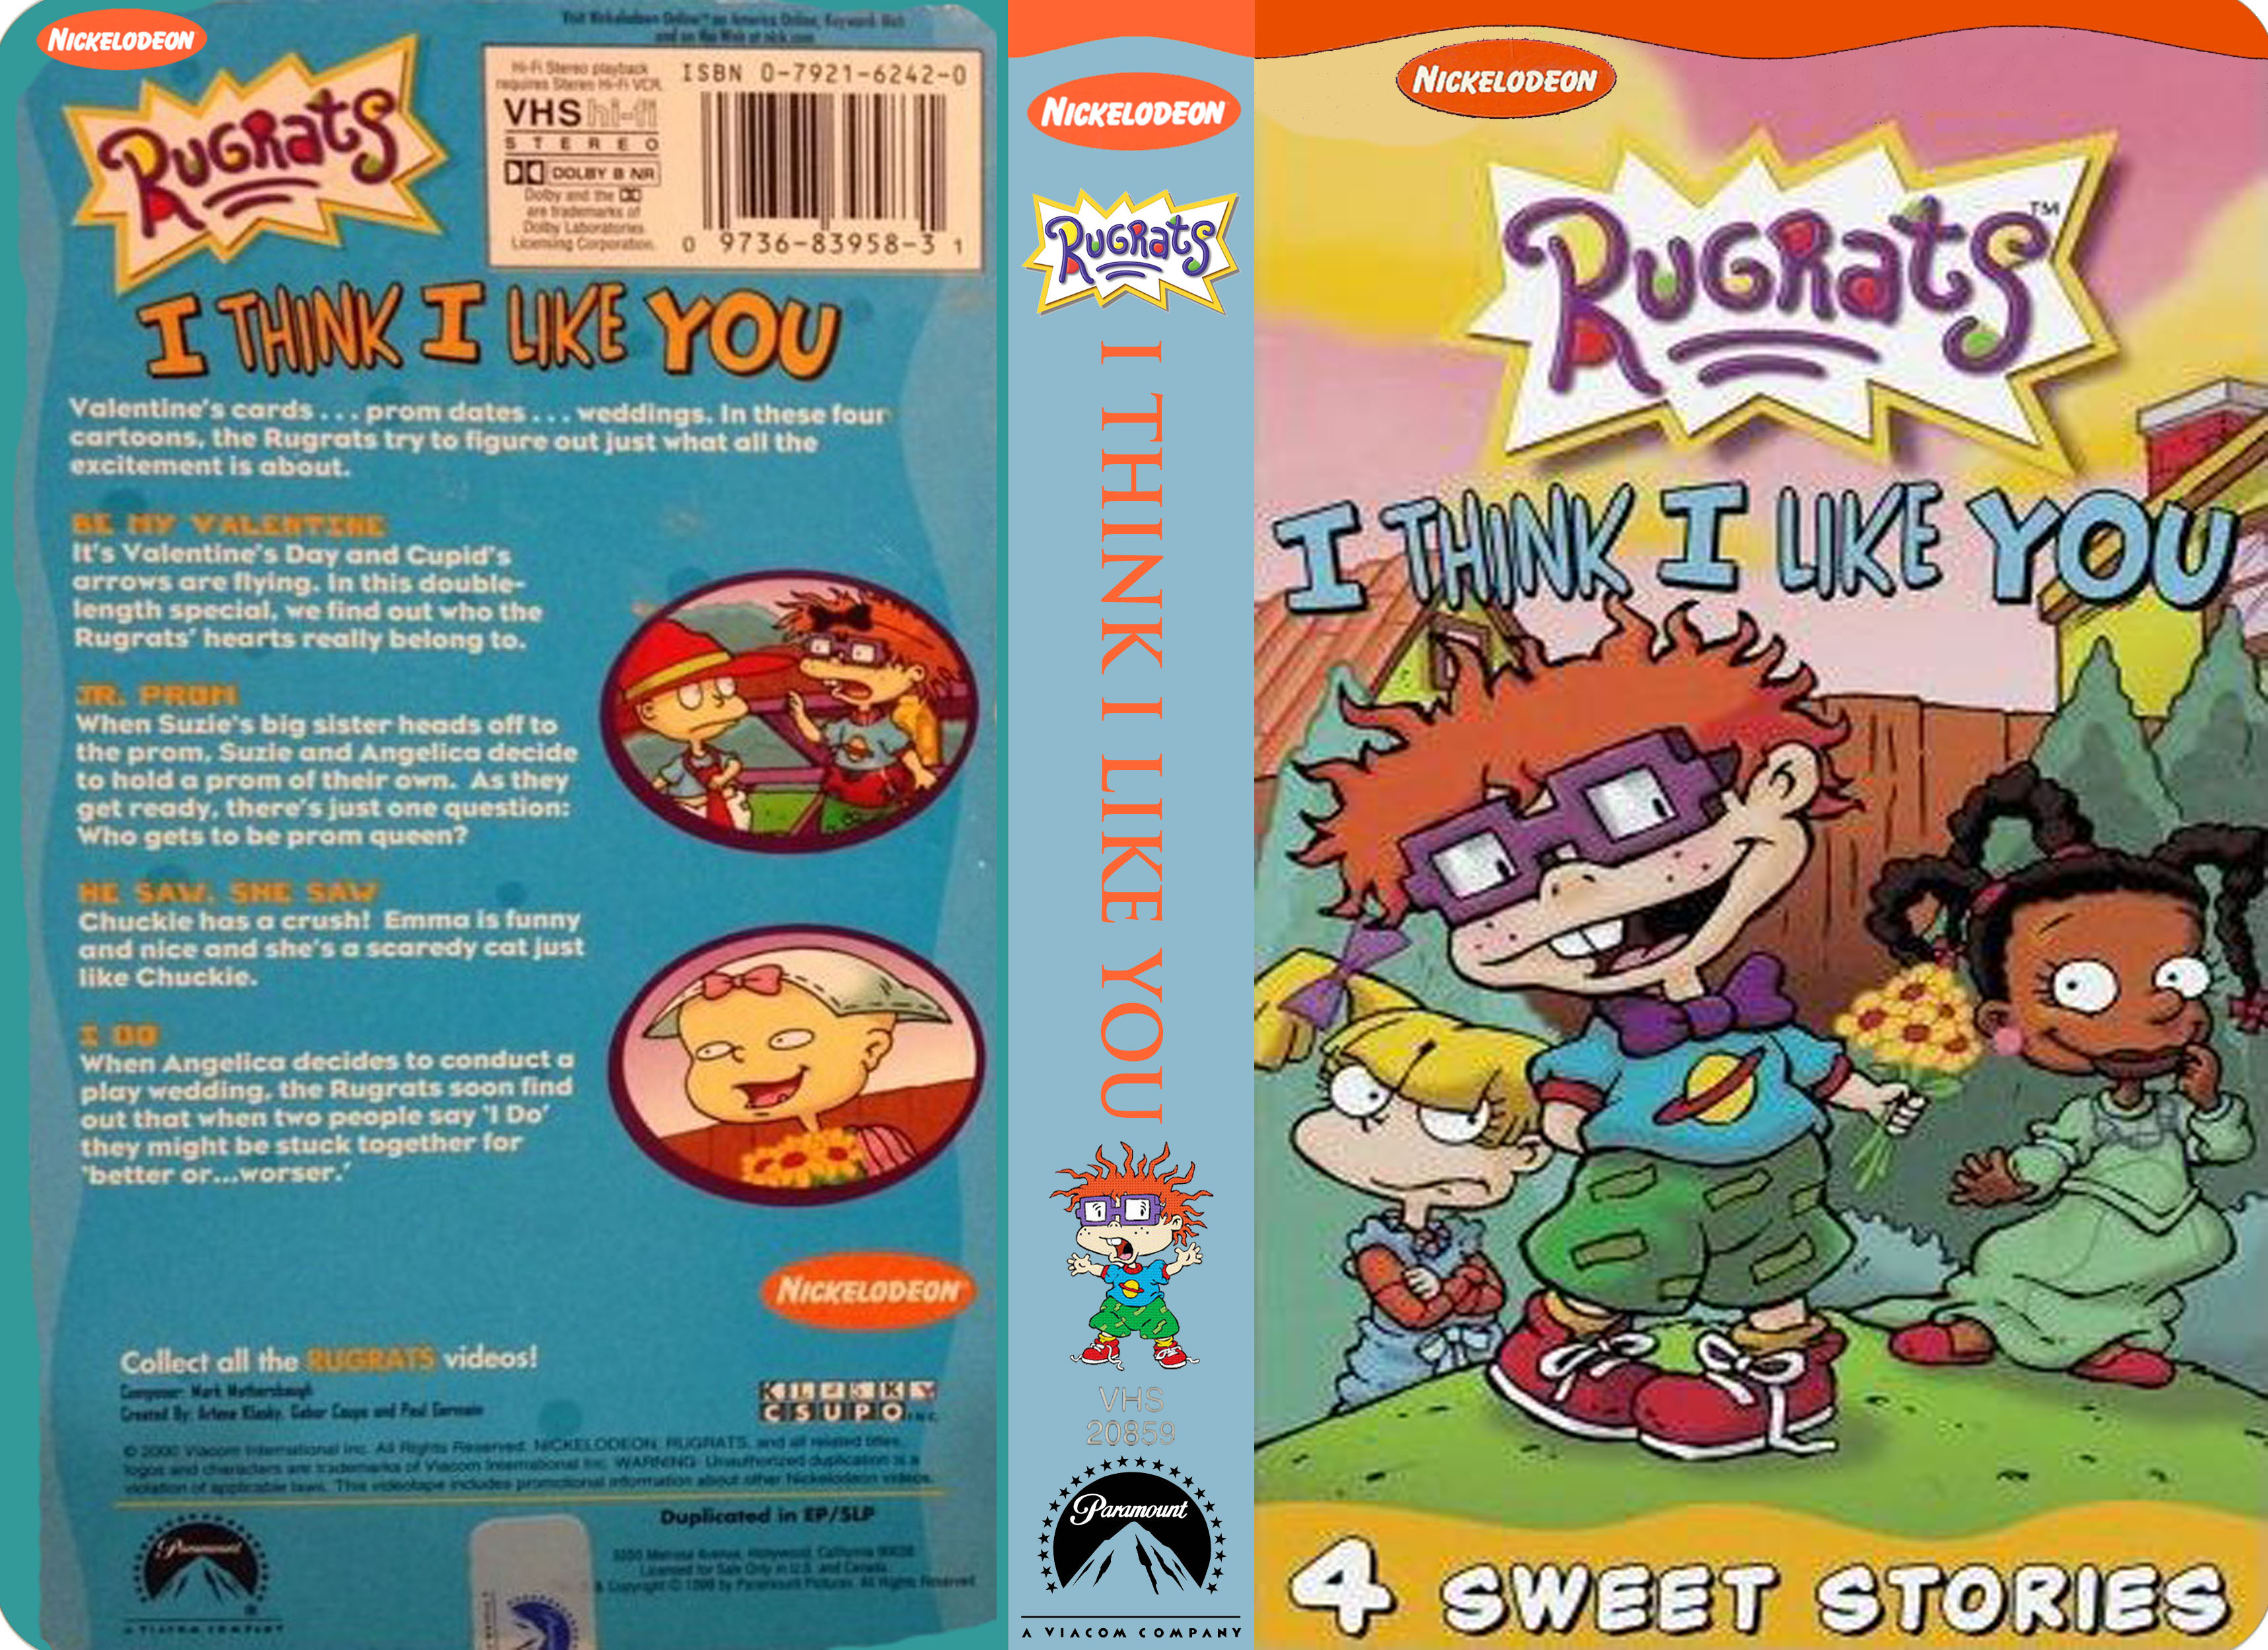 Photo of Nicklodeon's Rugrats I Think I Like You VHS for fans of Ru...